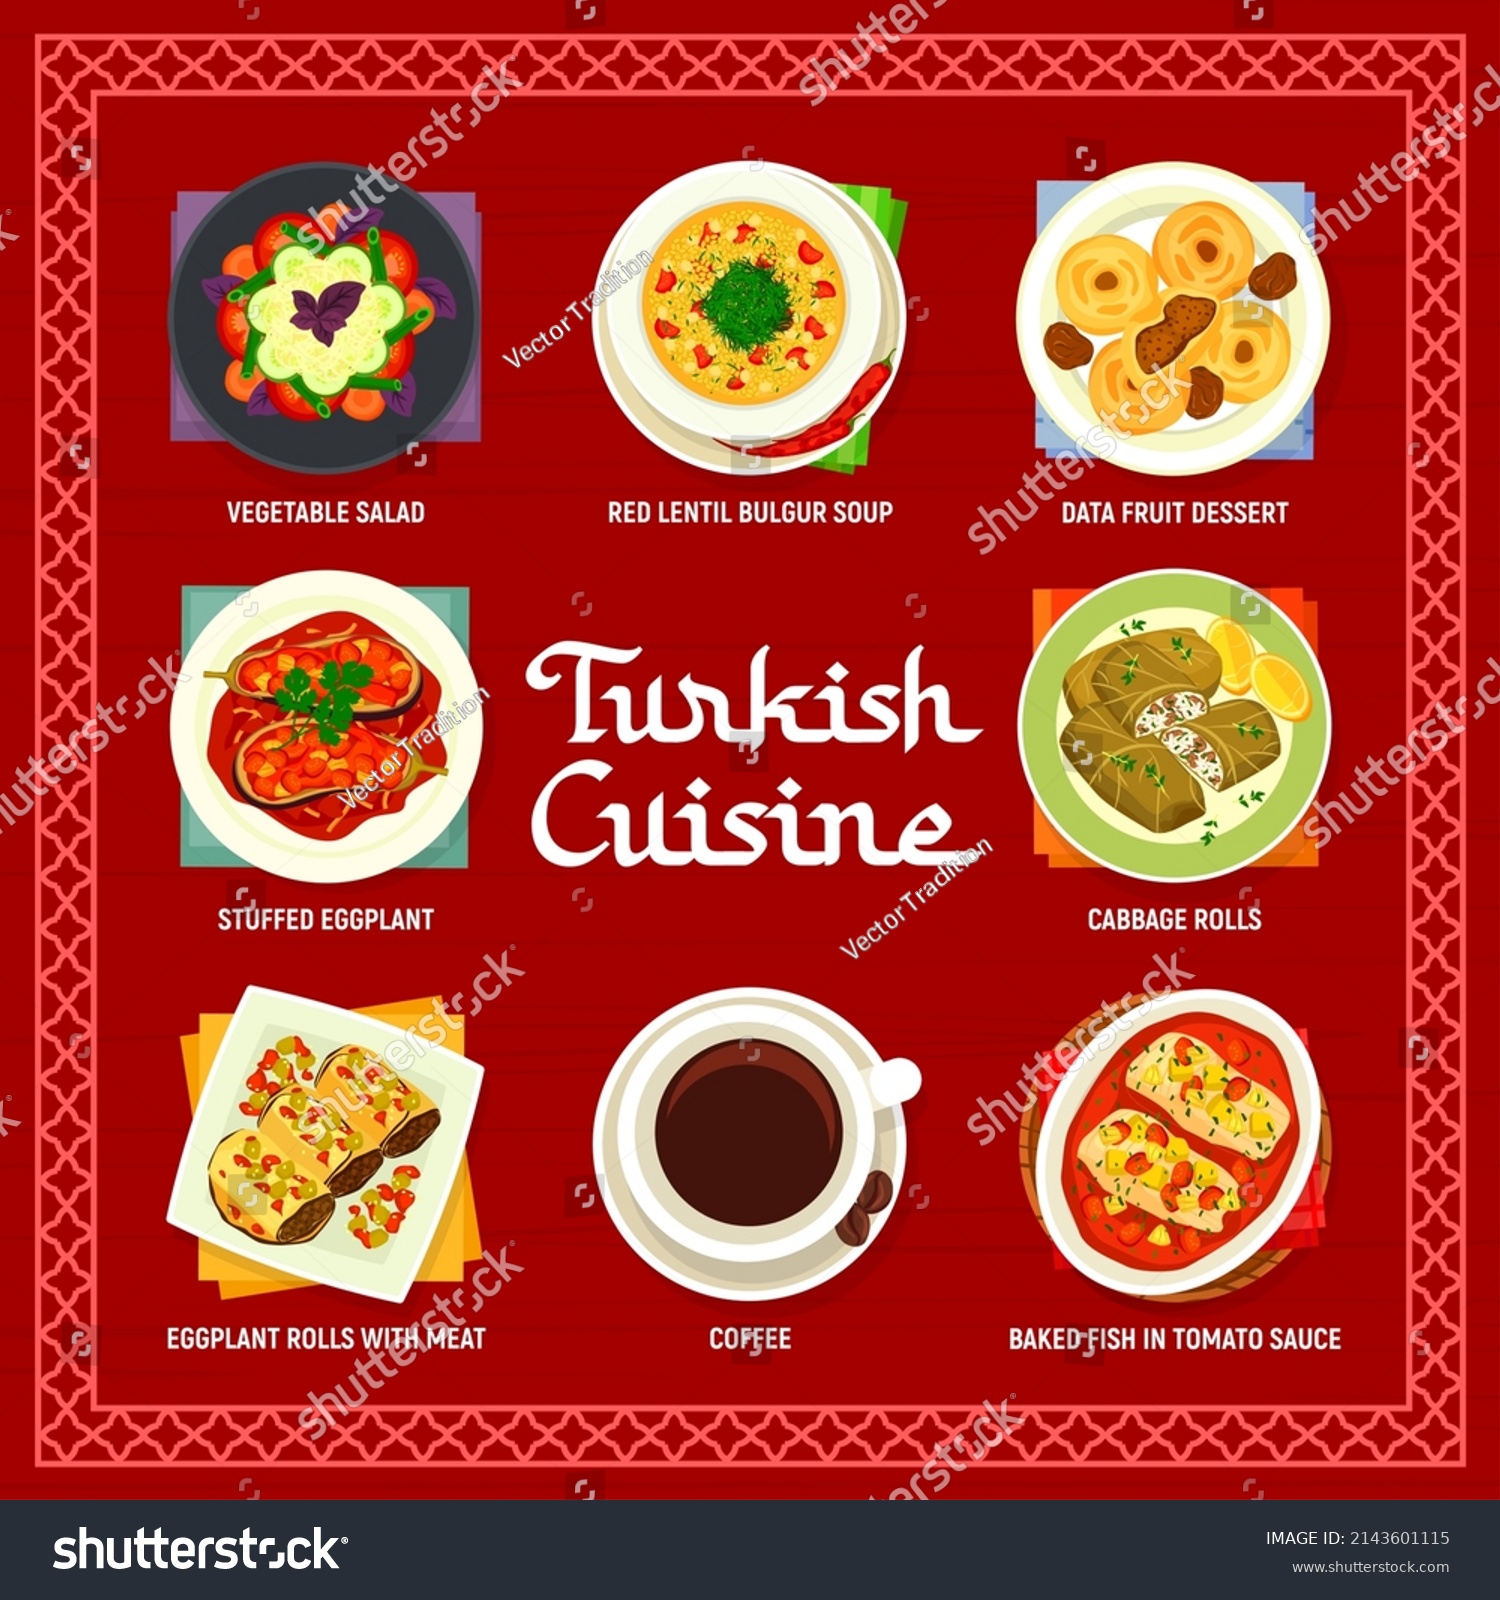 Turkish cuisine menu vector vegetable salad, red lentil bulgur soup and data fruit dessert. Stuffed eggplant, cabbage and eggplant rolls, baked fish in tomato sauce and coffee turkey food and drink #2143601115